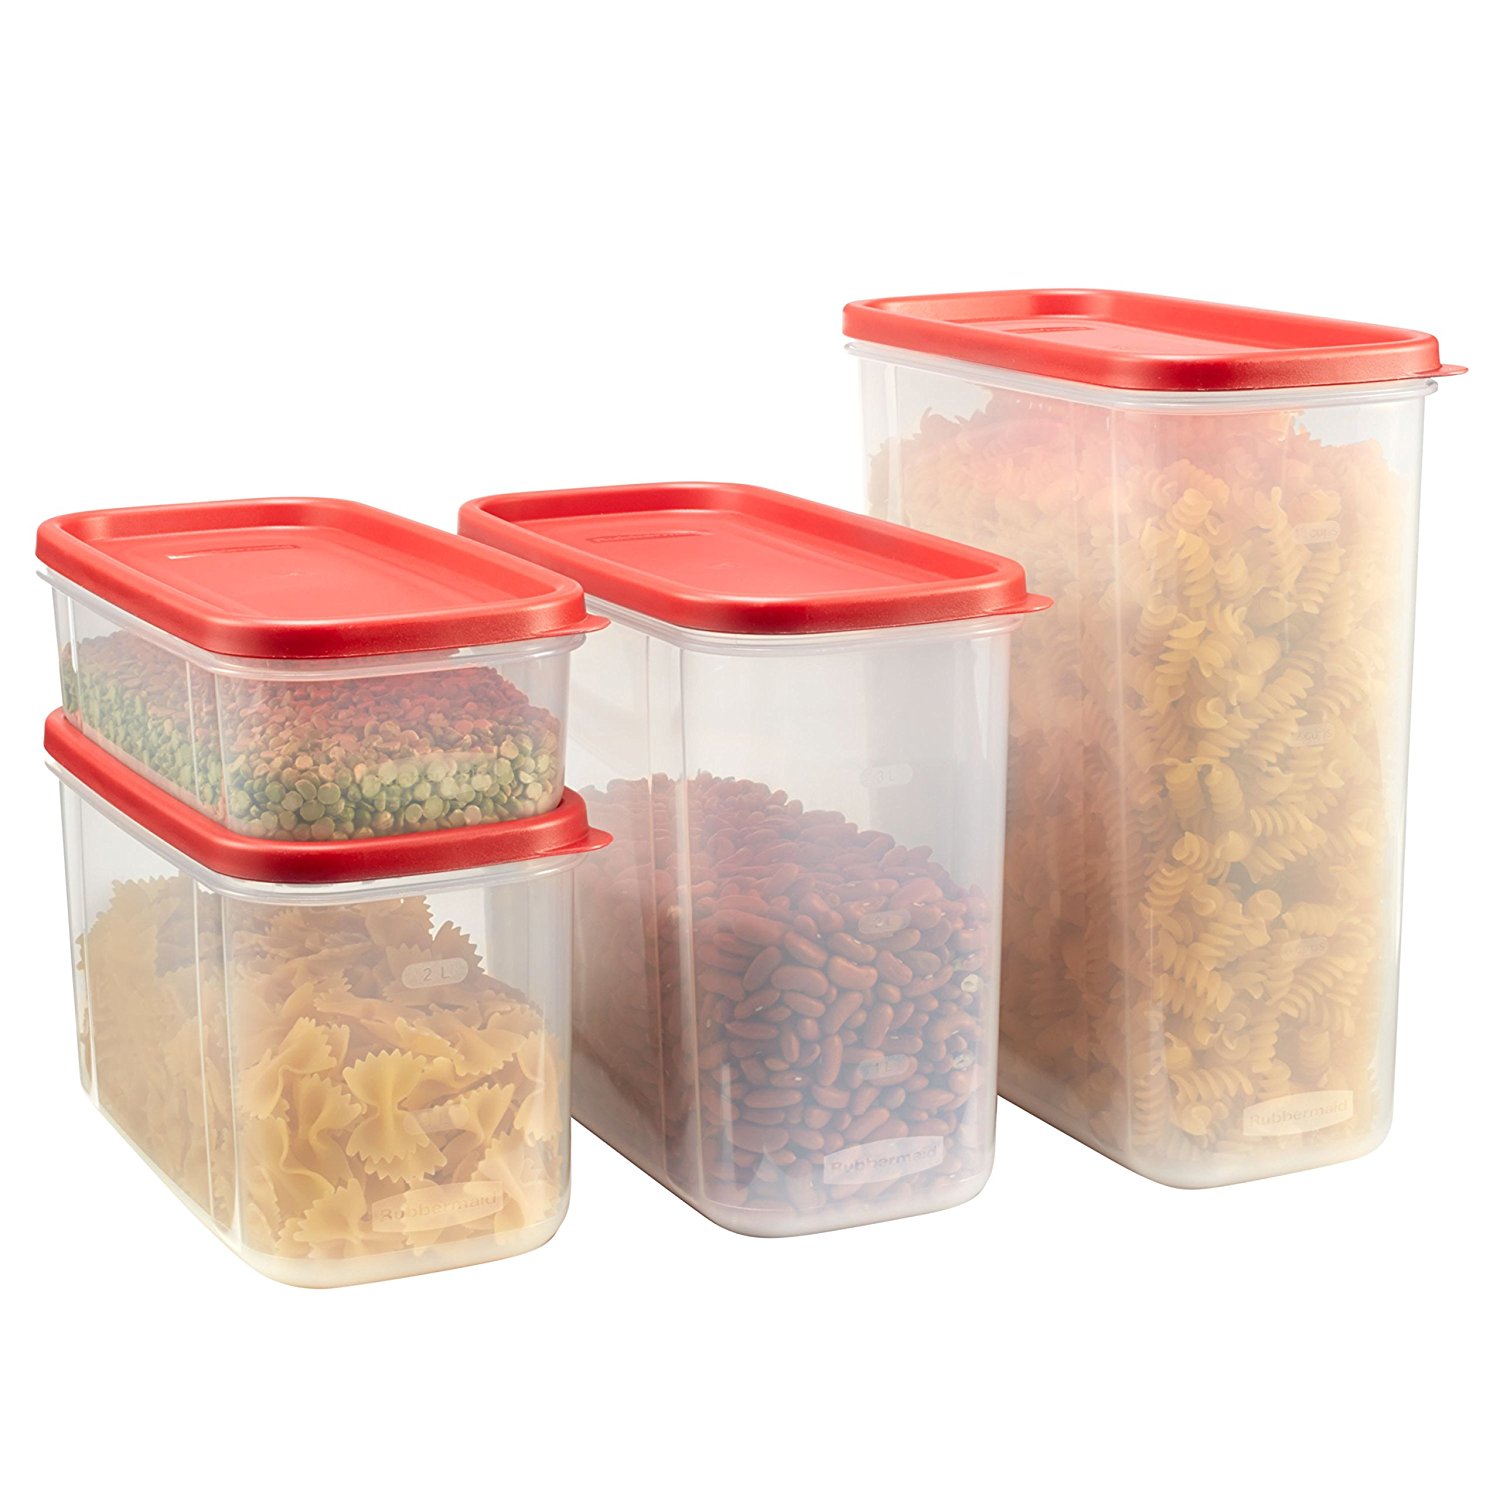 Rubbermaid Modular Canisters, Food Storage Containers – 8-piece Set – Just $12.62!